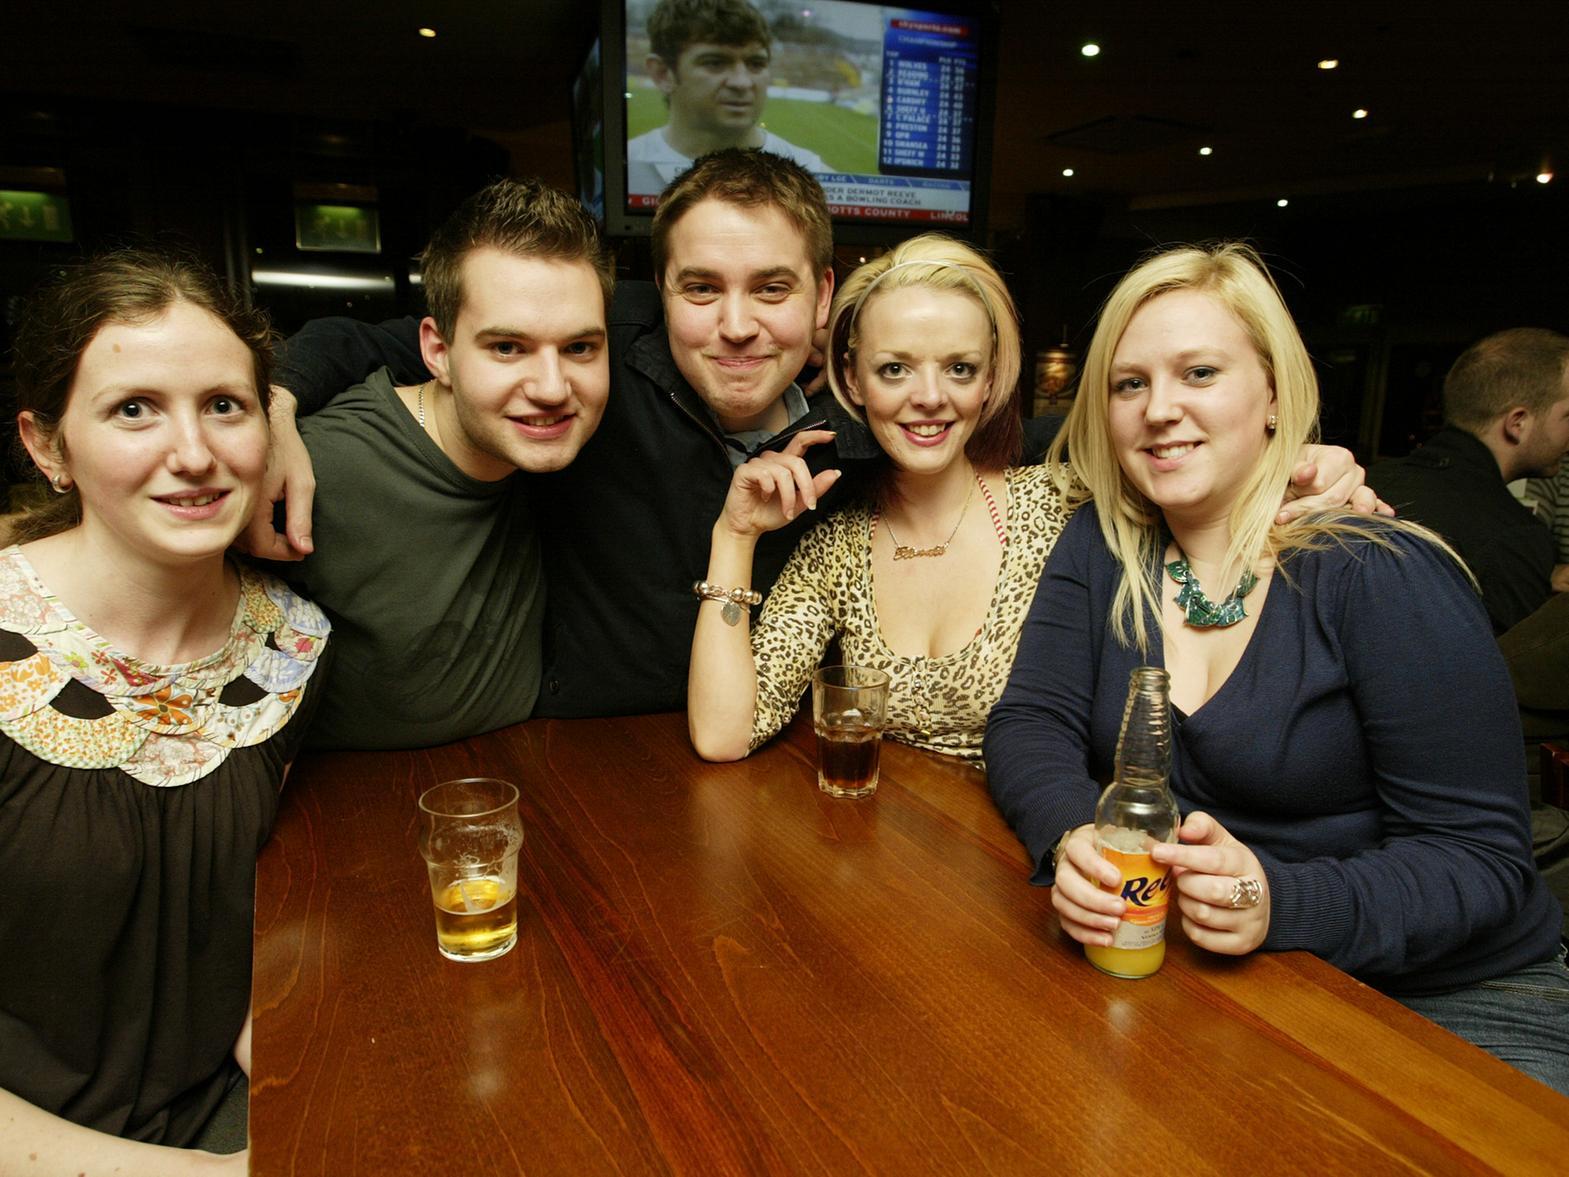 From the left: Linzi, Richard, Chris, Stacey and Danni.